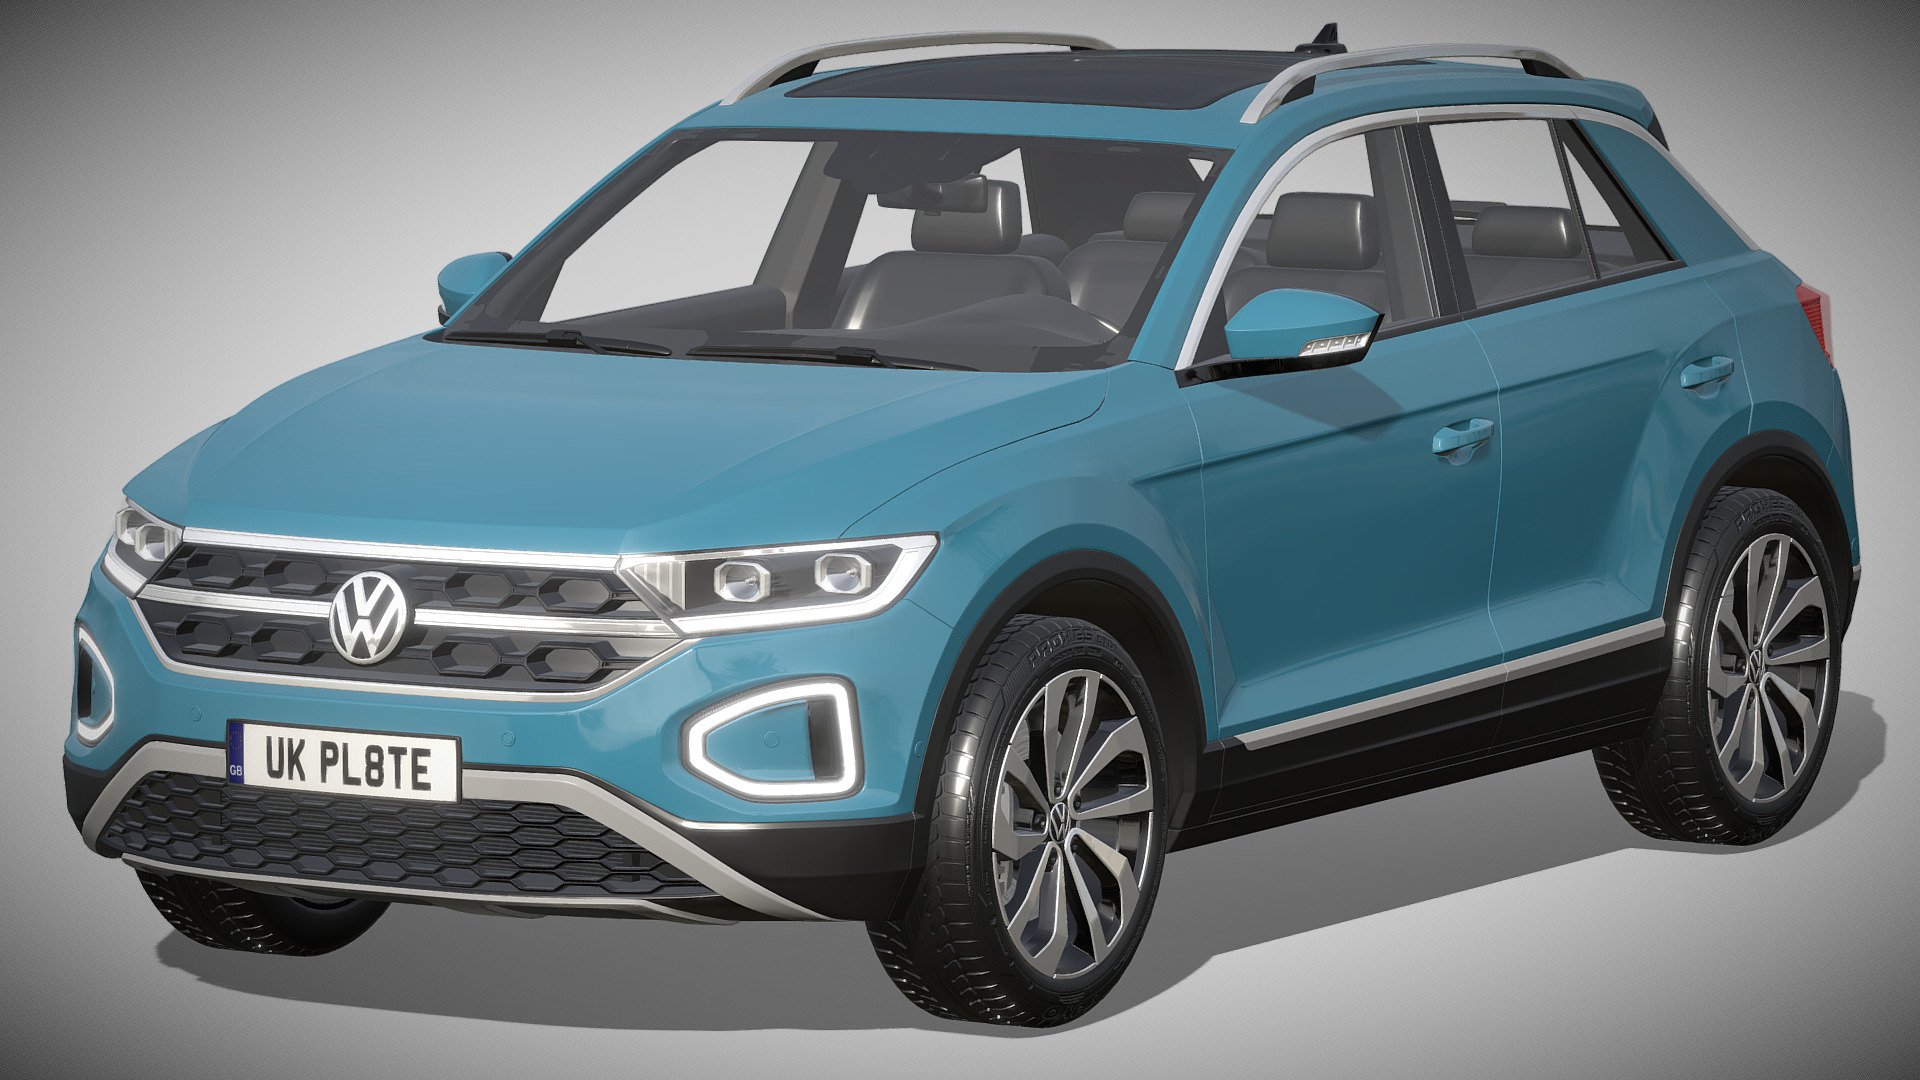 Volkswagen T‑Roc 2022

https://www.volkswagen.de/de/modelle/t-roc.html

Clean geometry Light weight model, yet completely detailed for HI-Res renders. Use for movies, Advertisements or games

Corona render and materials

All textures include in *.rar files

Lighting setup is not included in the file! - Volkswagen T-Roc 2022 - Buy Royalty Free 3D model by zifir3d 3d model